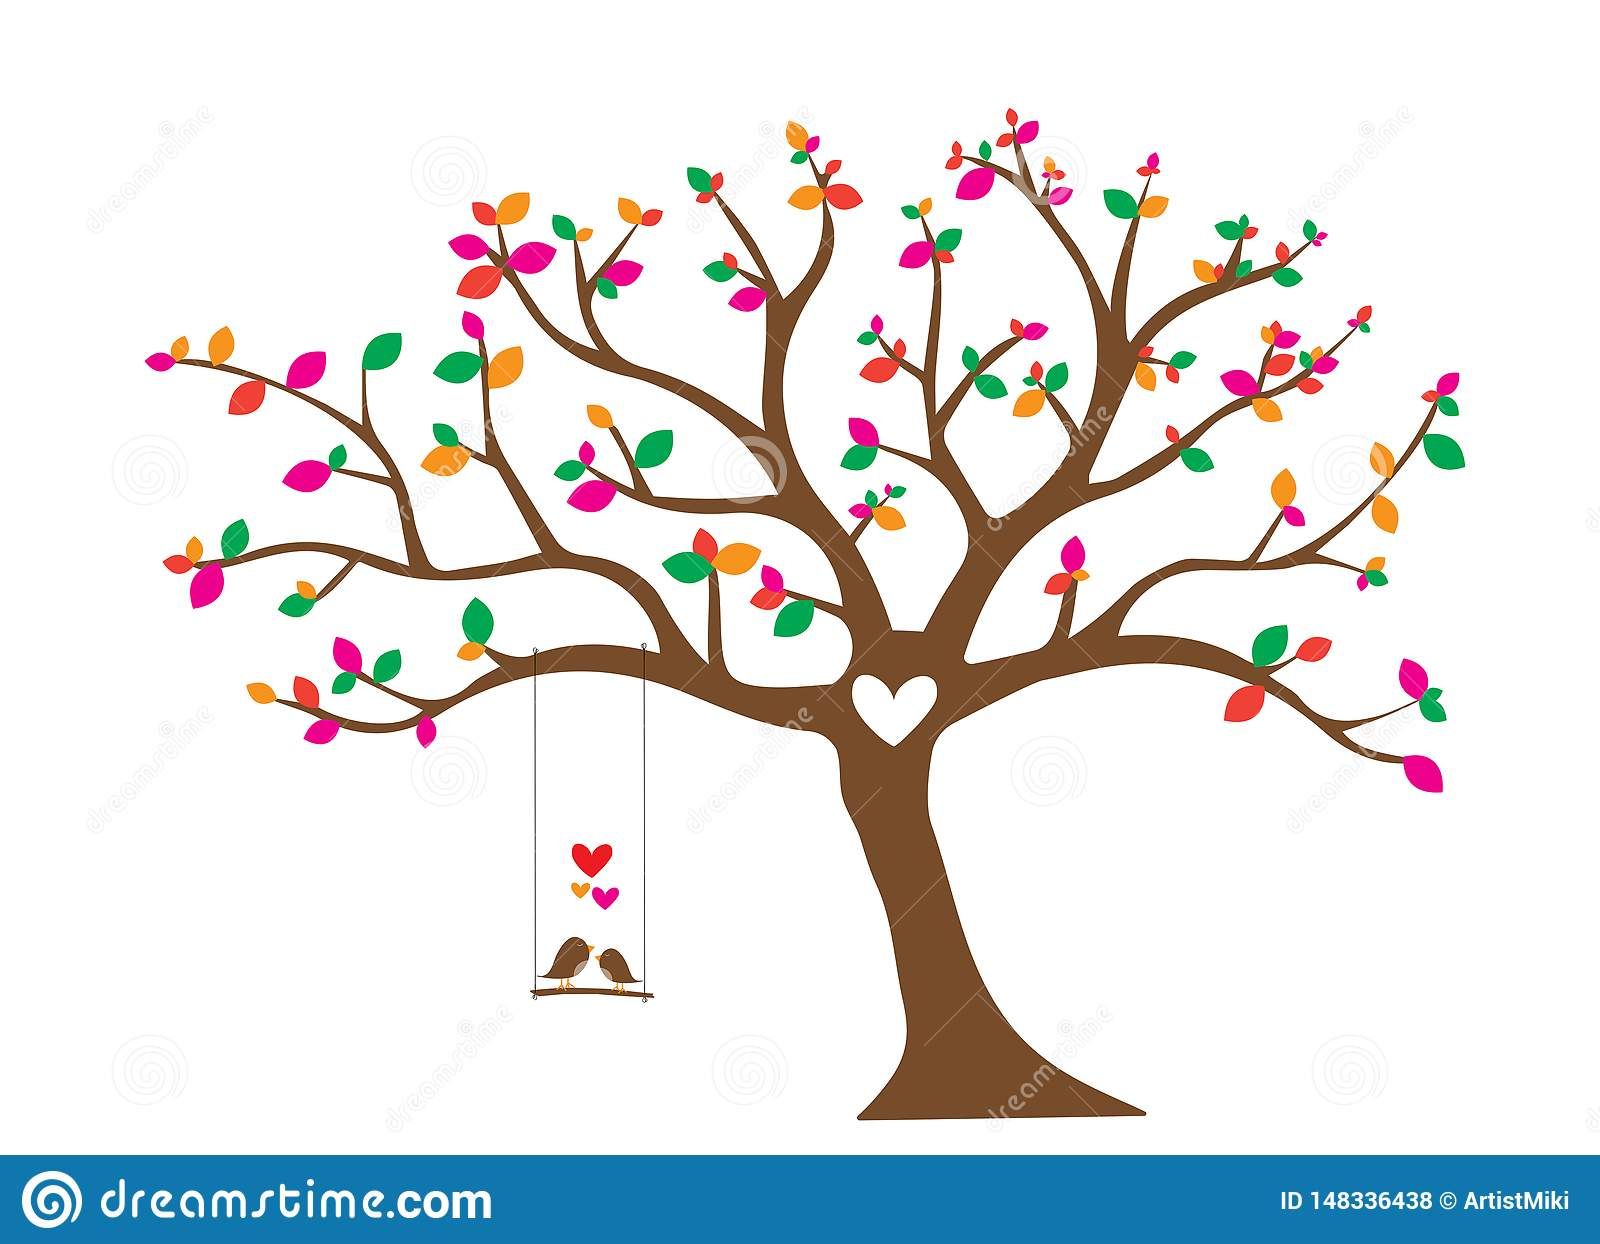 Birds Couple Silhouette On Colorful Tree With Heart Vector Regarding Birds On A Branch Wall Decor (View 28 of 30)